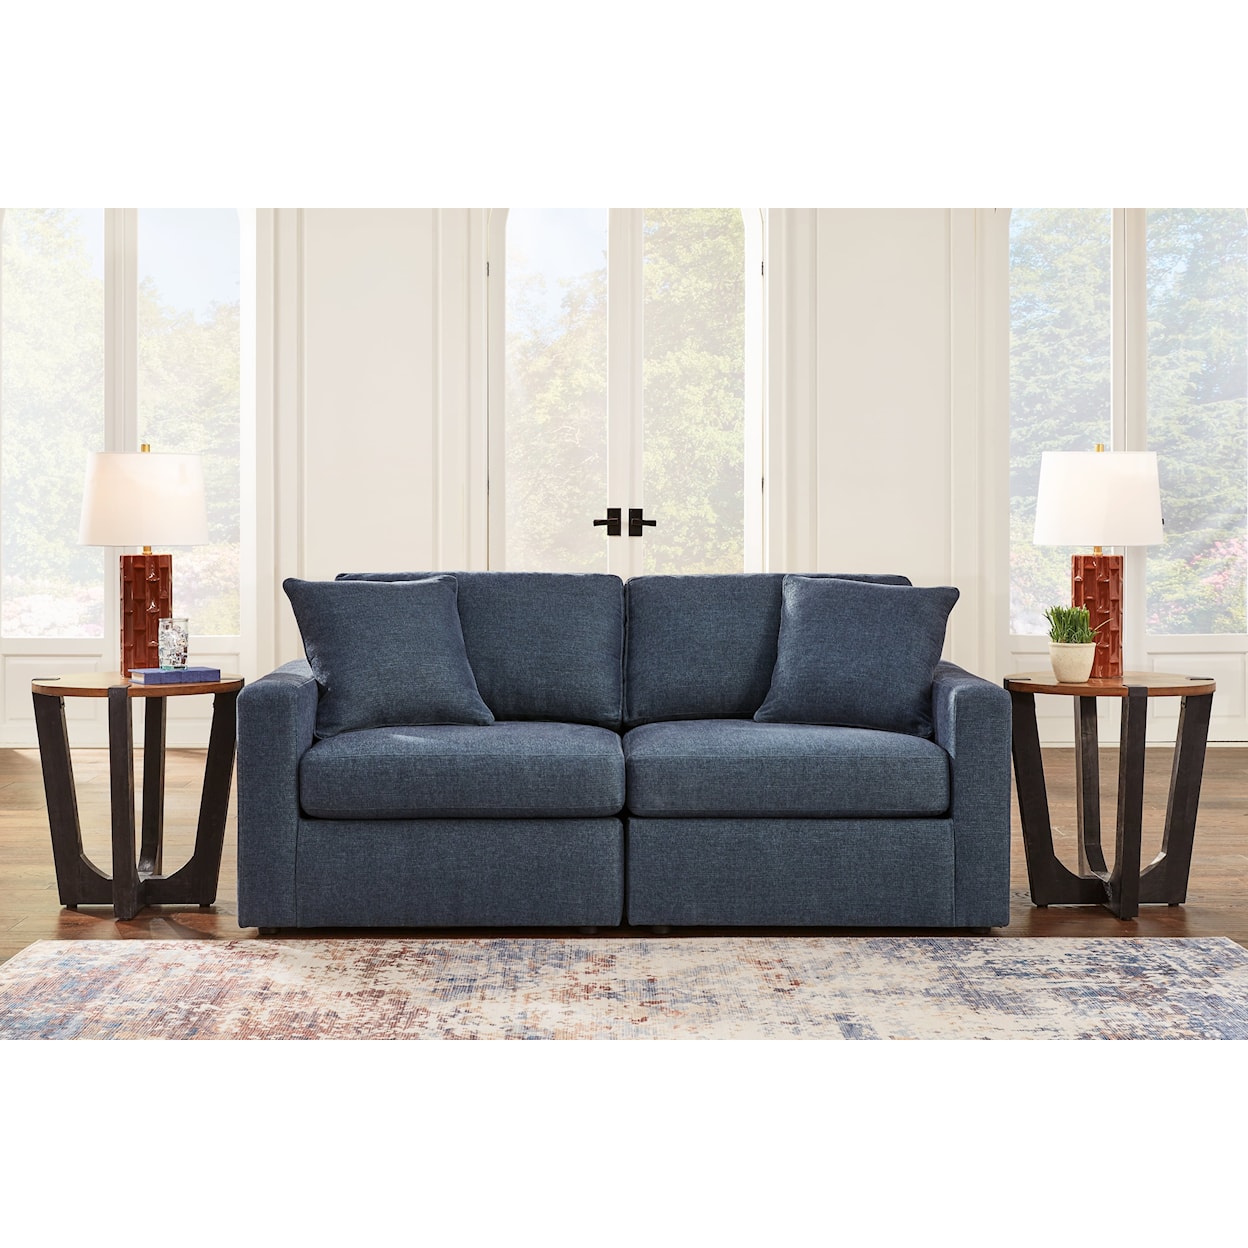 Signature Design by Ashley Modmax 2-Piece Sectional Loveseat